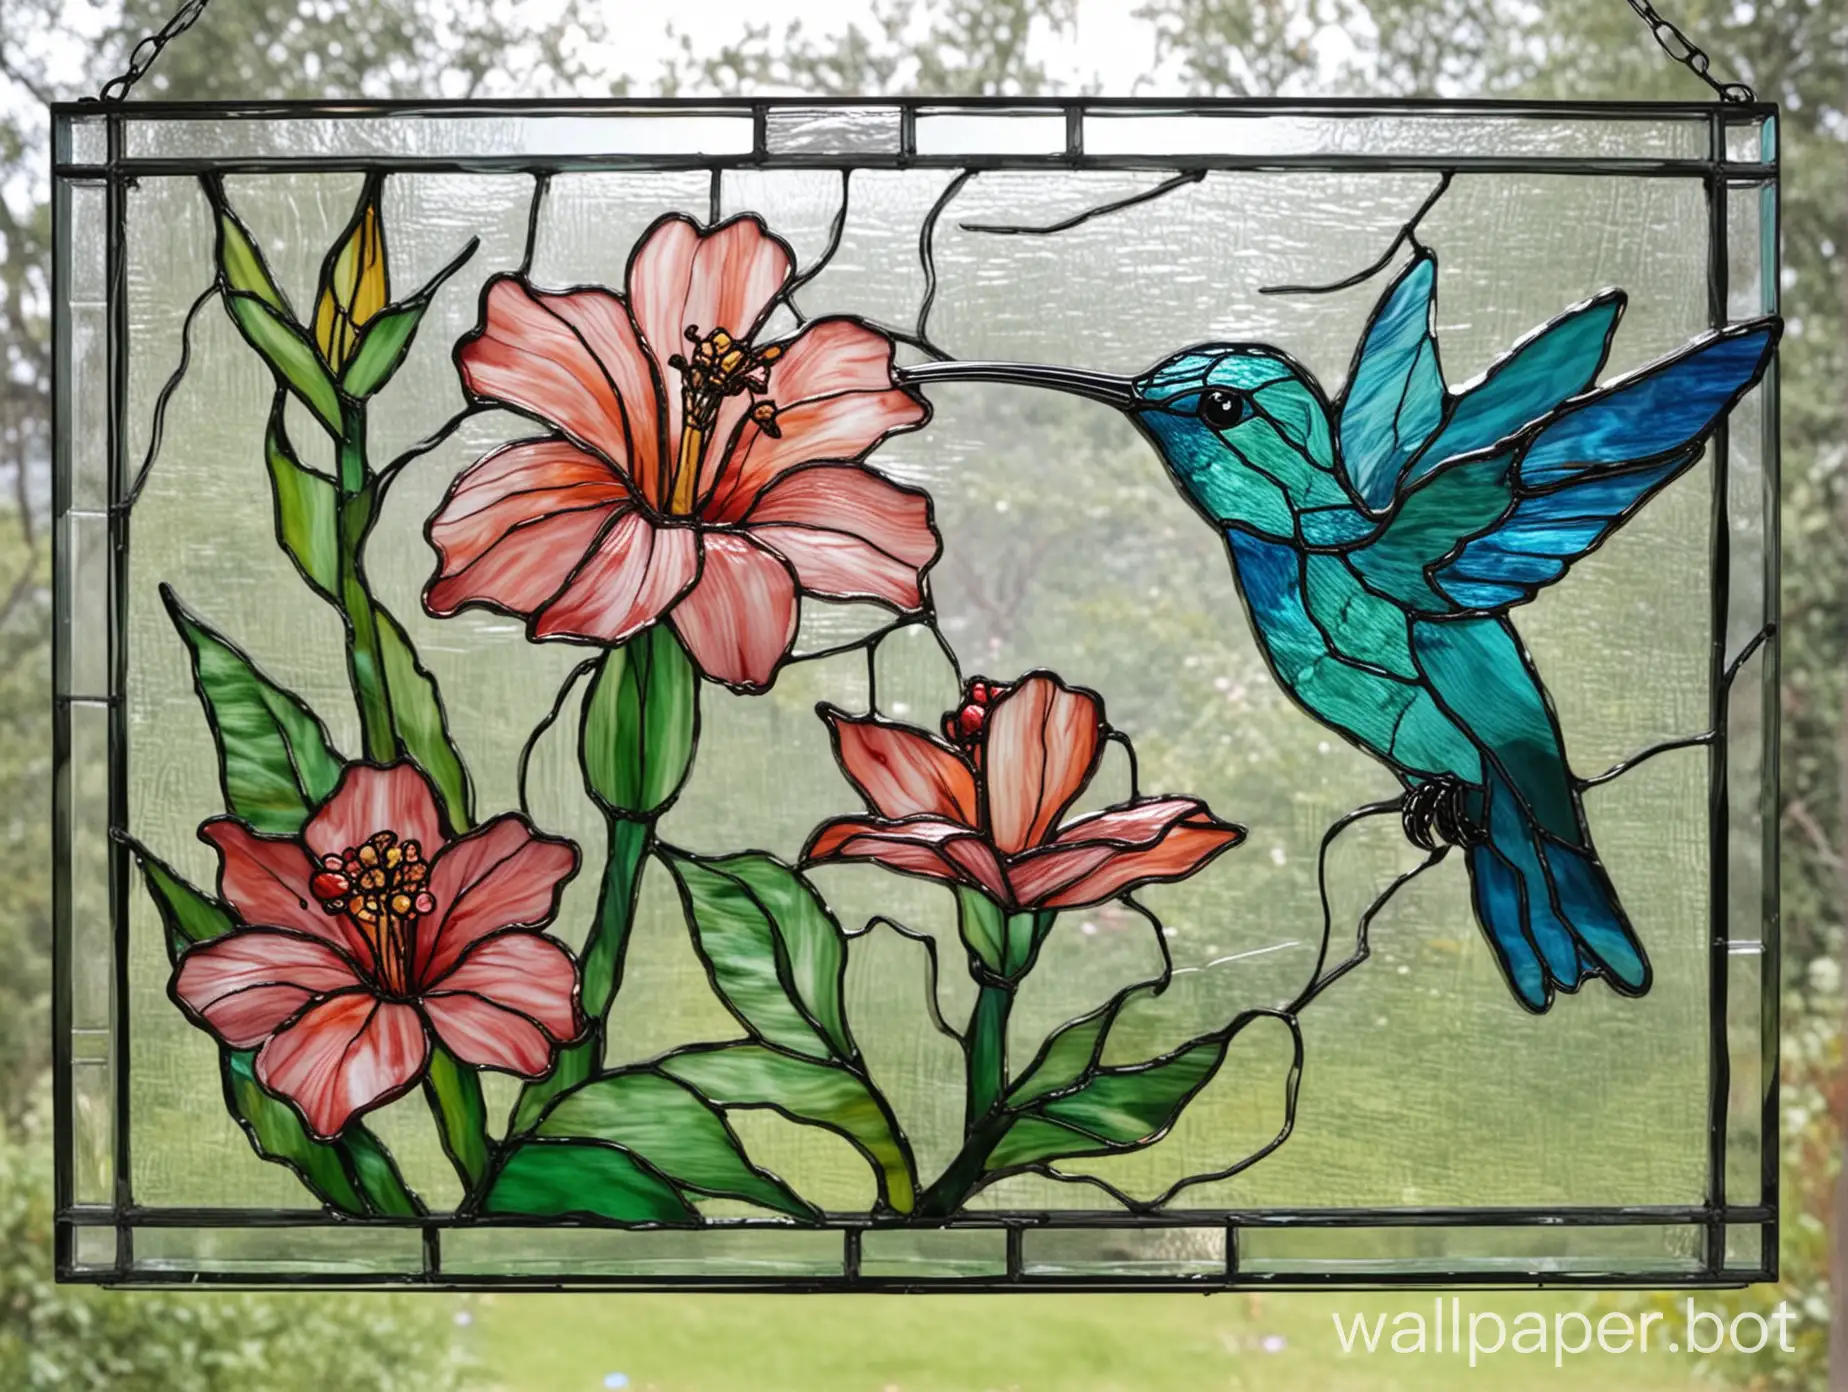 Stained glass without joints. One hummingbird and a flower.